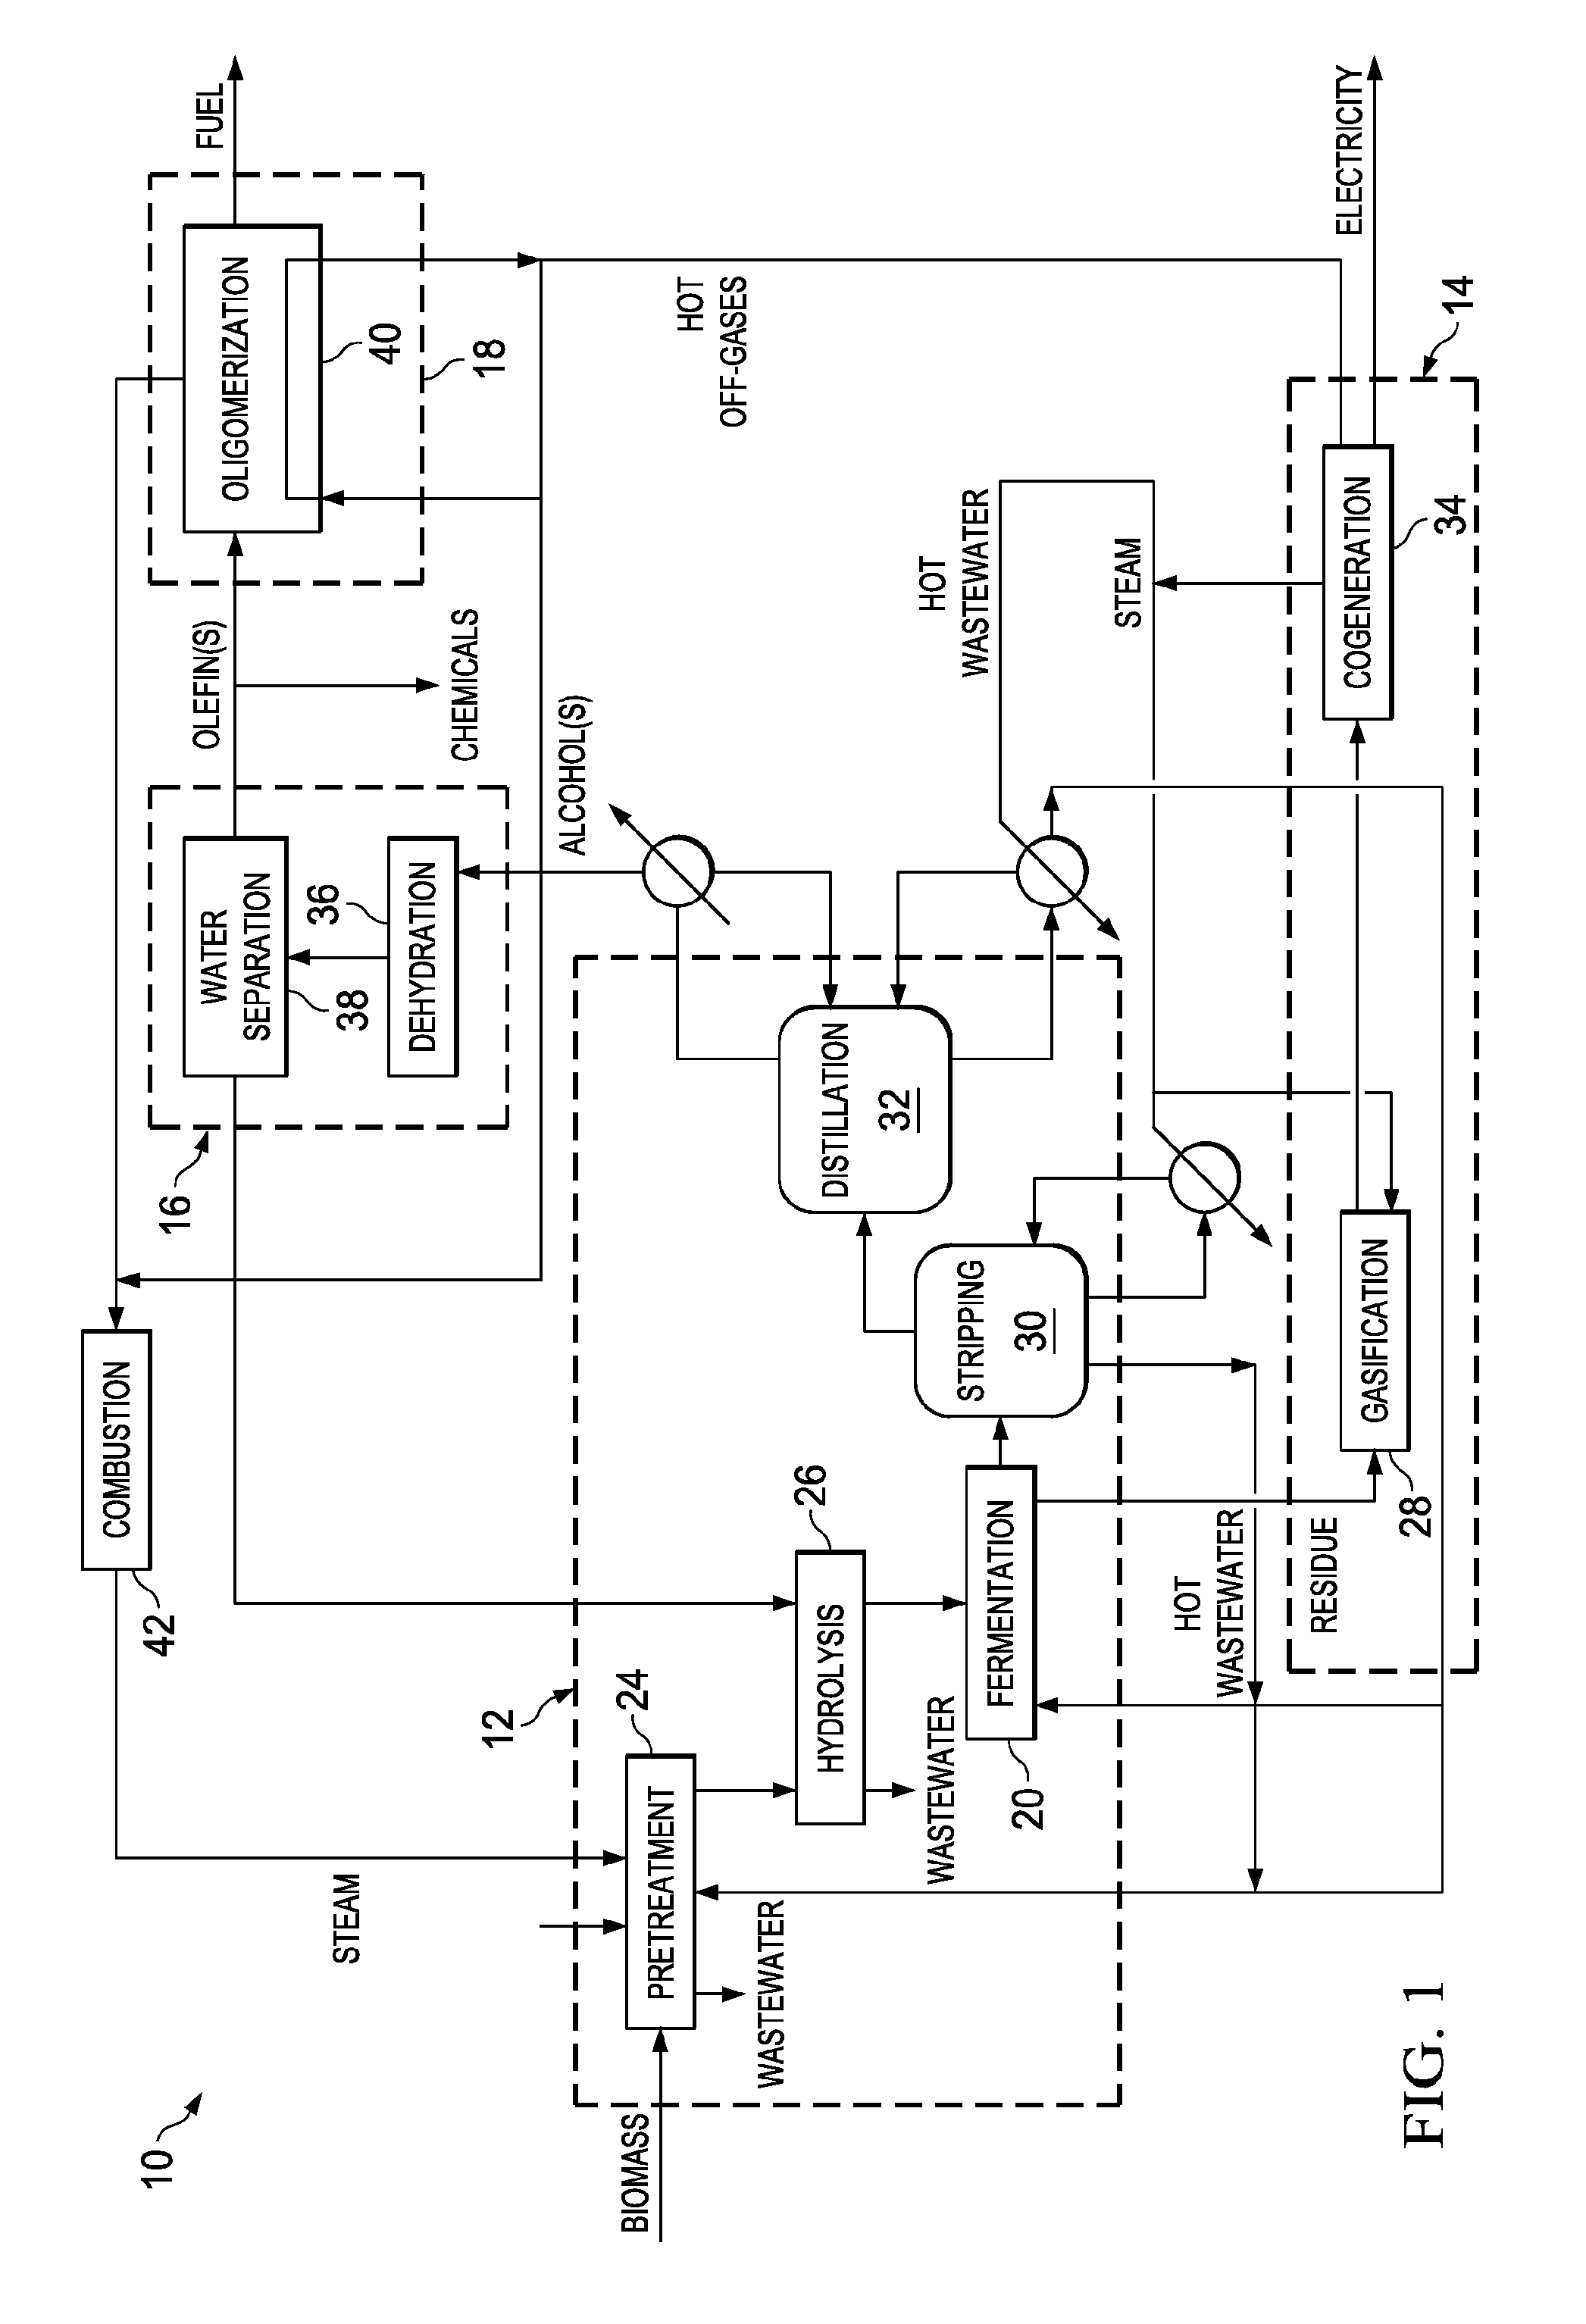 Integrated biofuel processing system